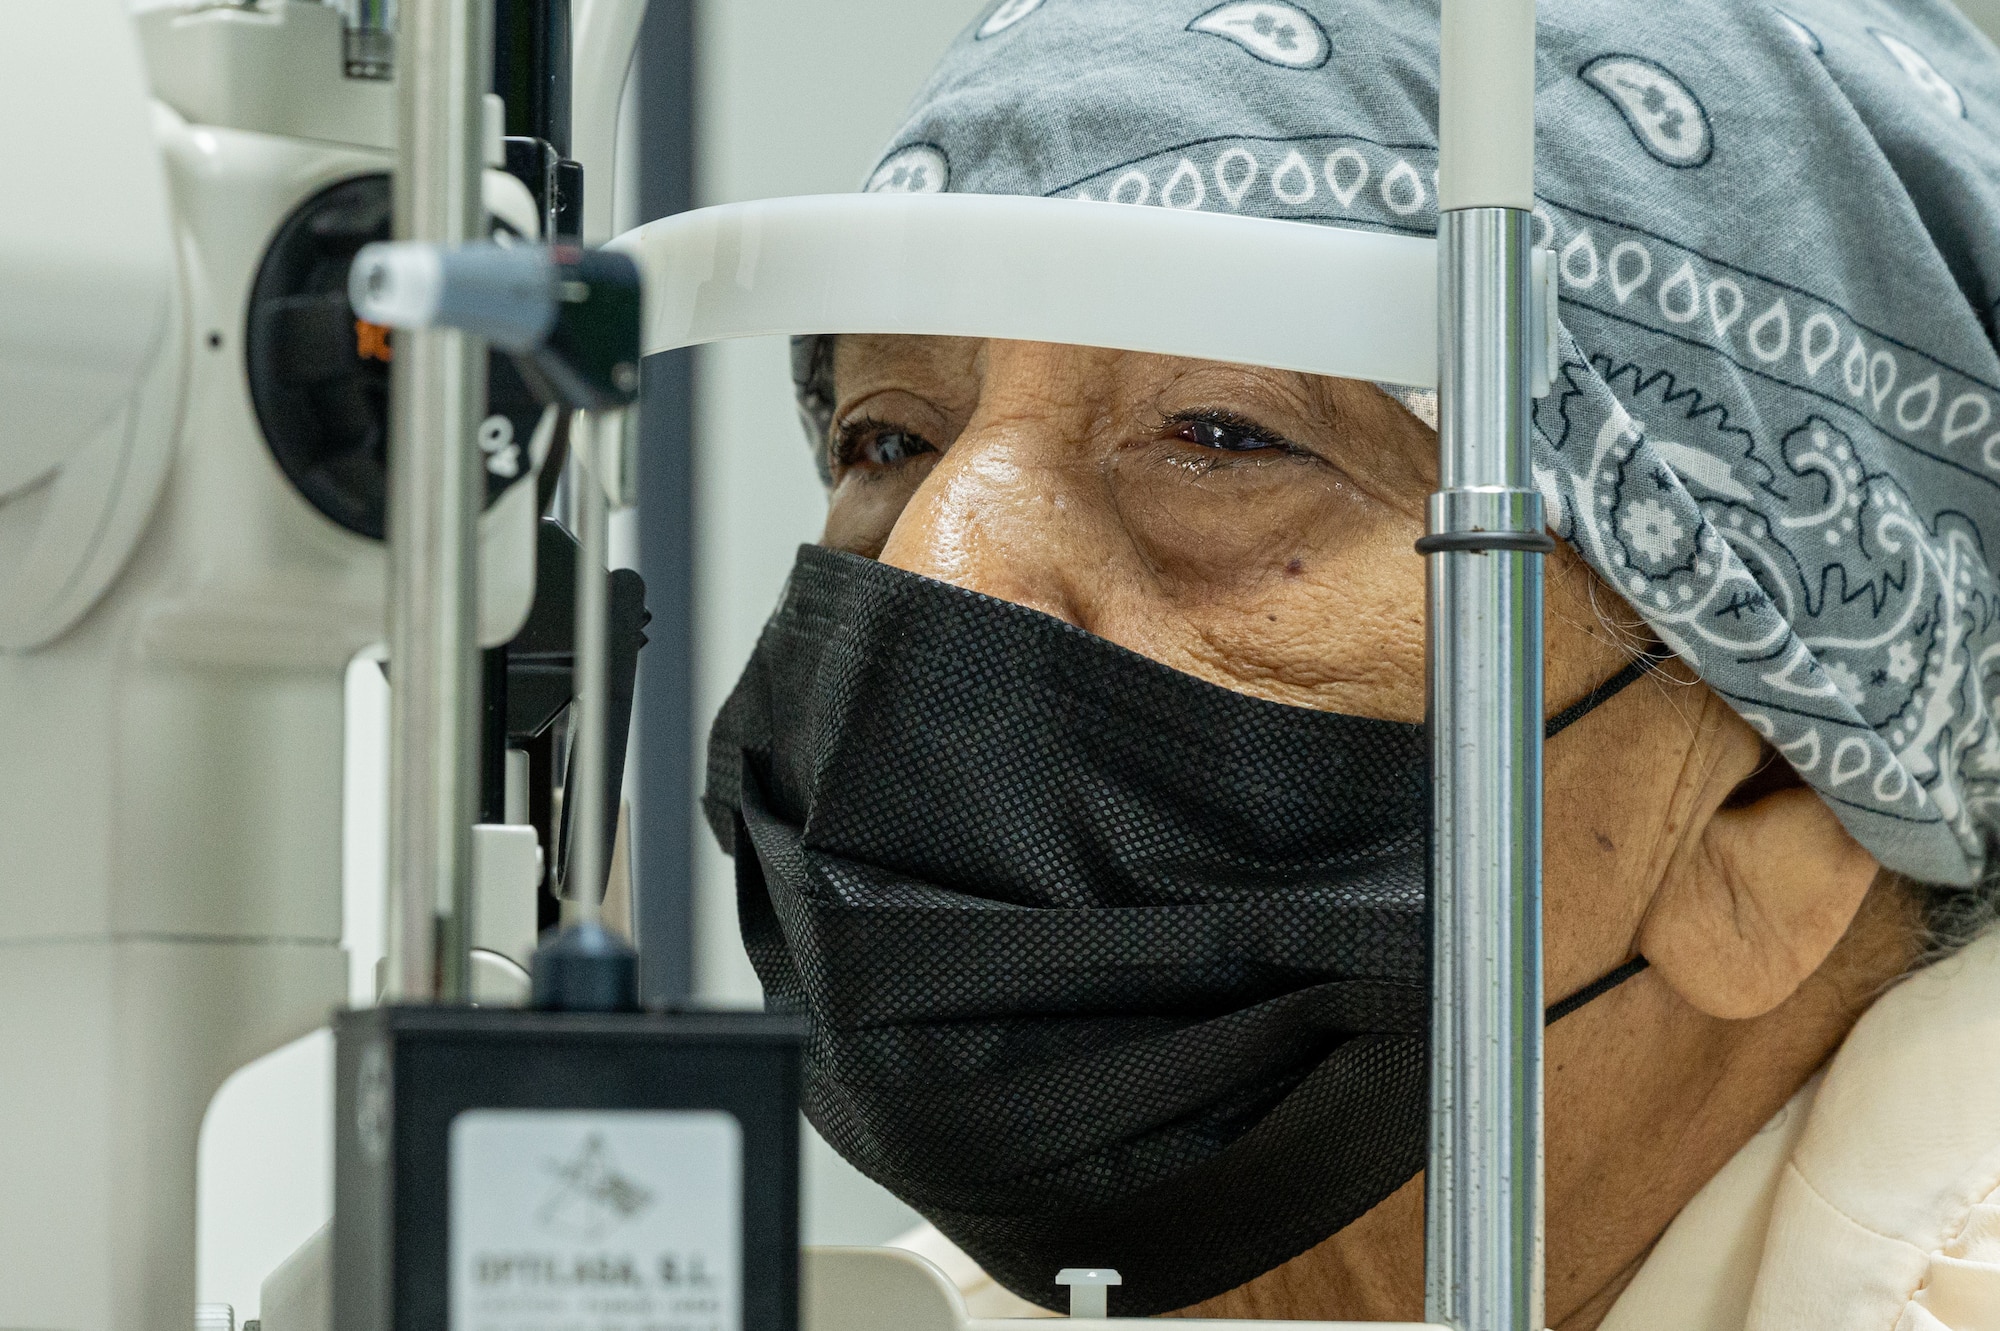 A patient sits in front of an autorefractor in the postoperative exam room to evaluate how her eye is healing after receiving manual small incision cataract surgery.